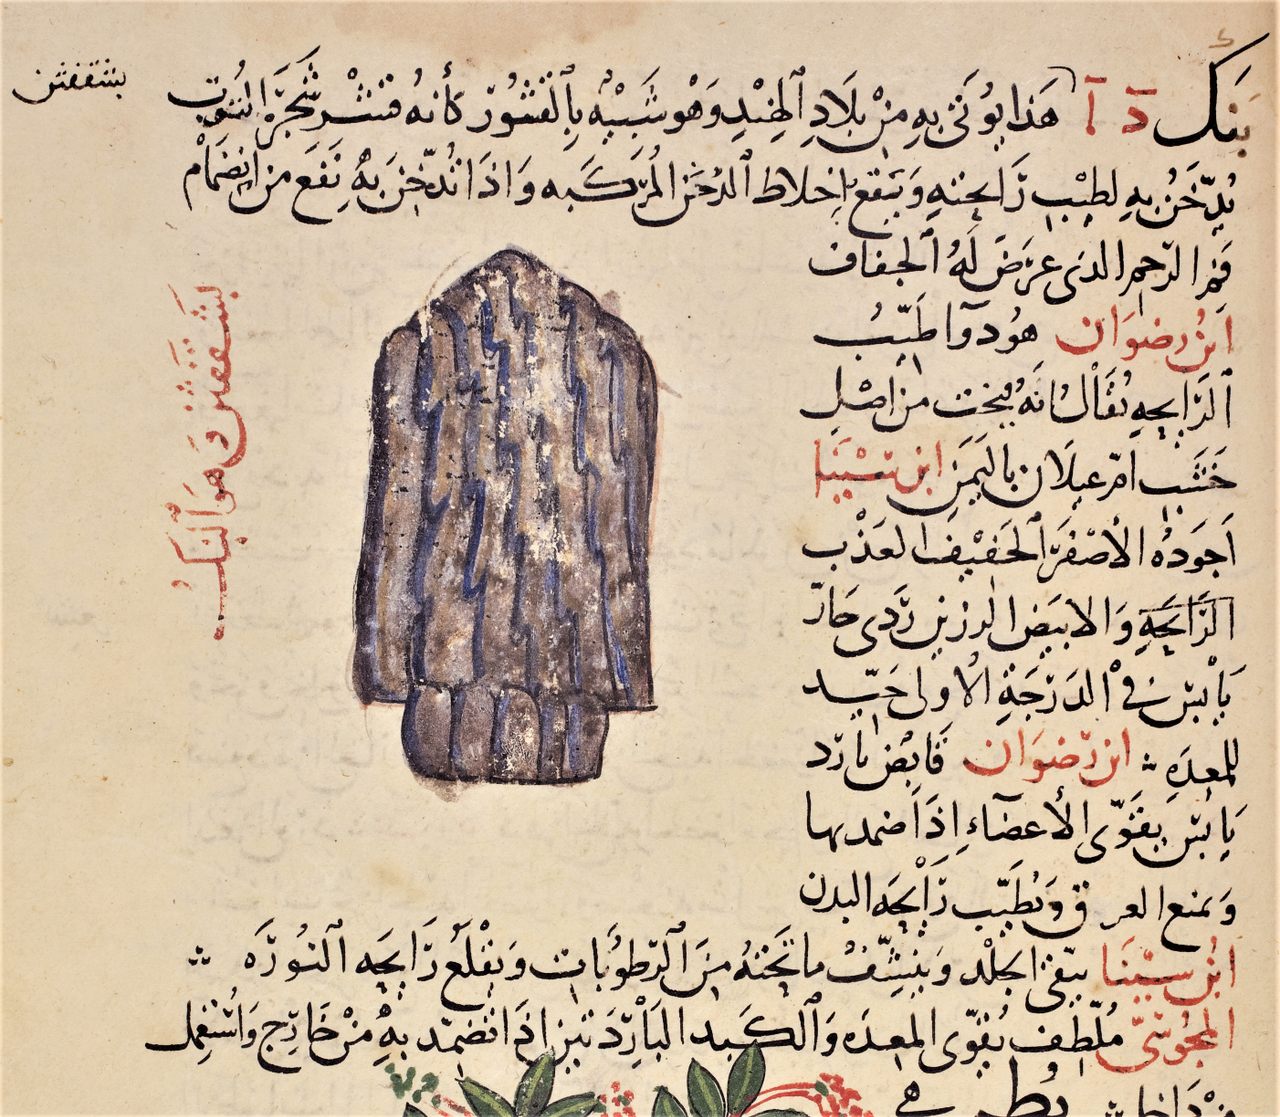 In this manuscript of the work of 12th-century physician al-Ghafiqi, <em>bunk</em> is depicted either as bark, or perhaps the husk of a coffee bean.